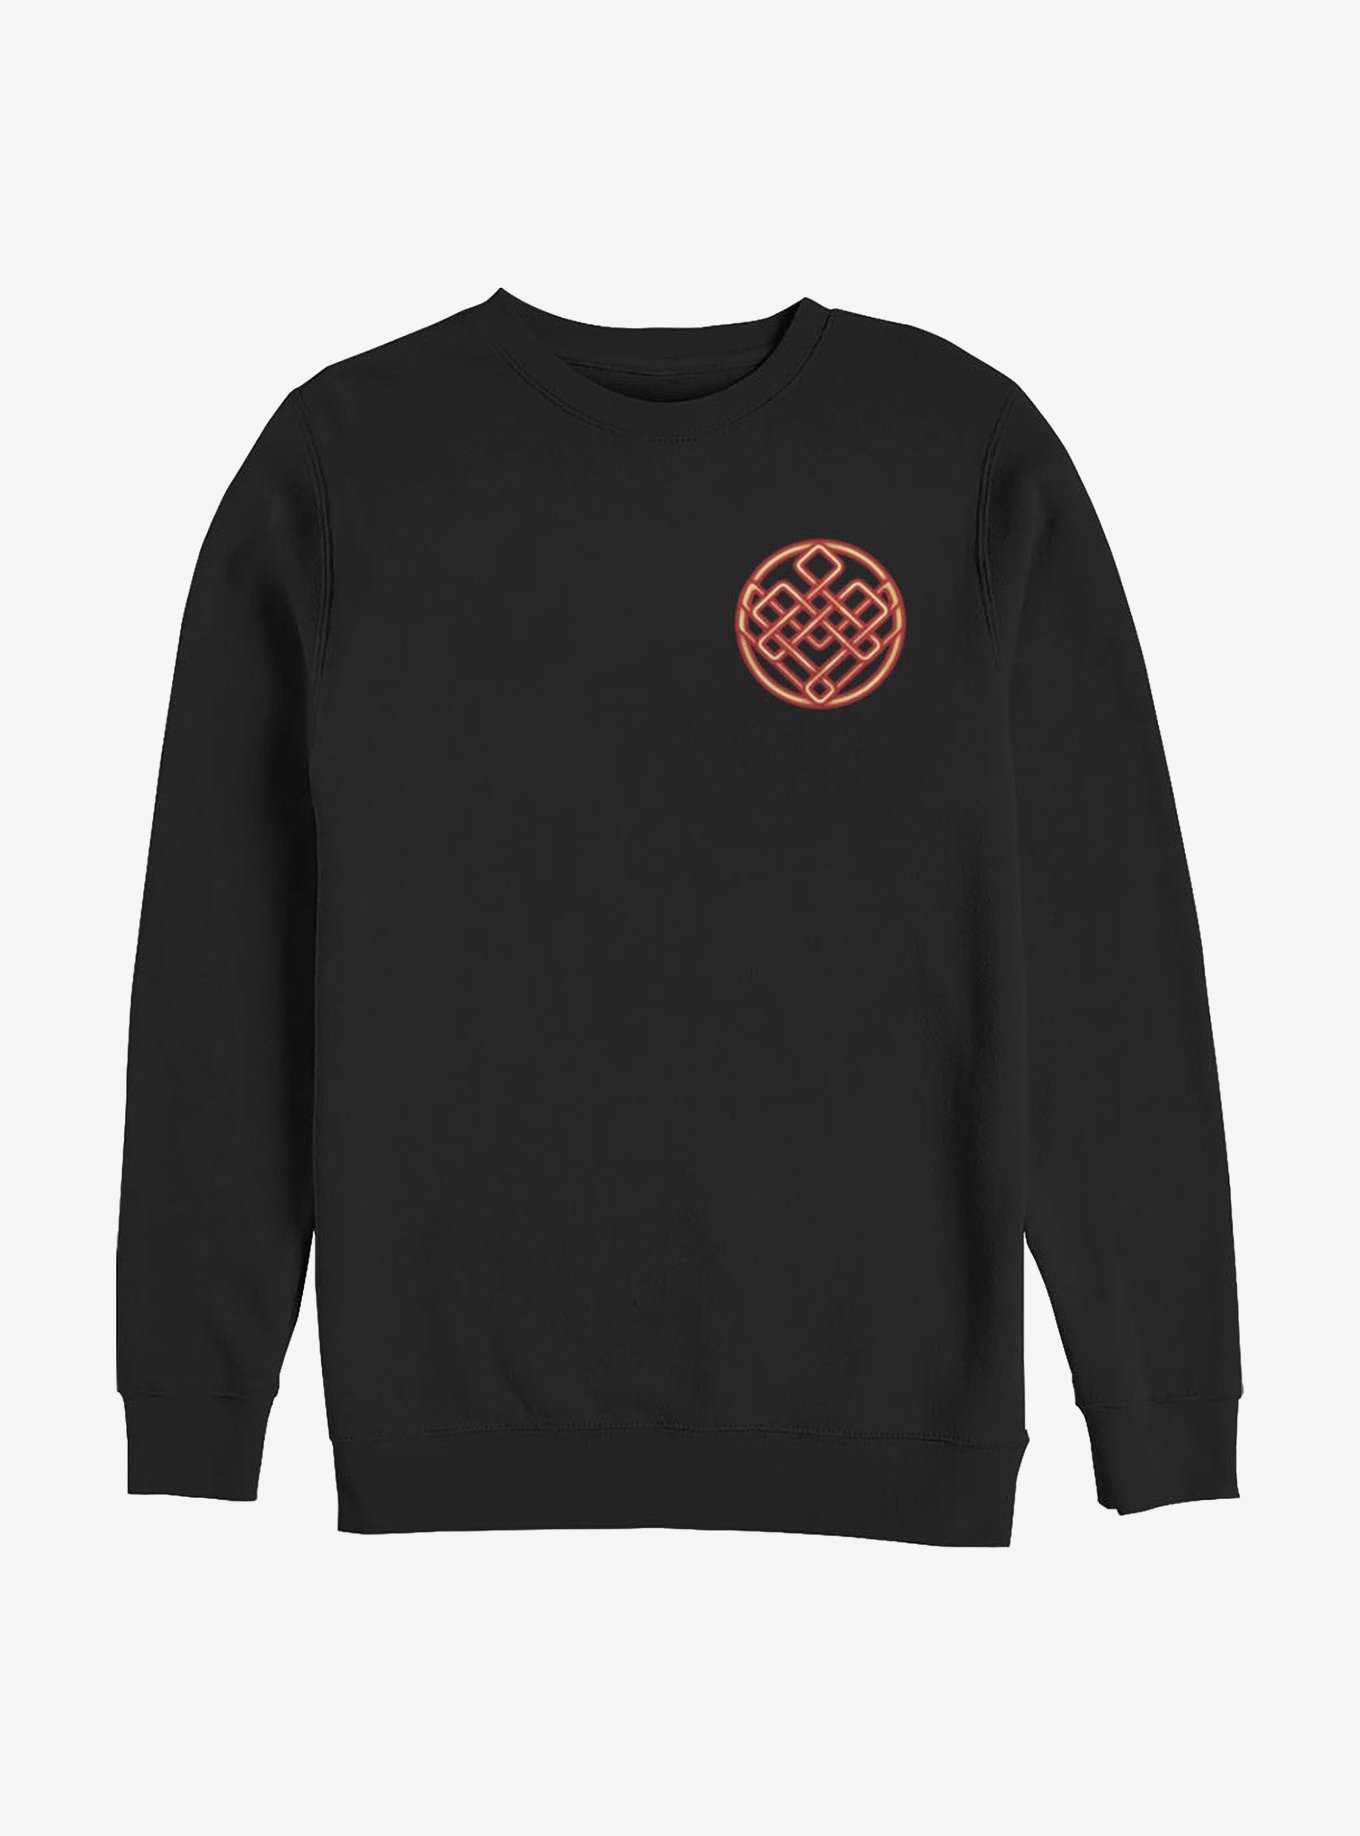 Marvel Shang-Chi And The Legend Of The Ten Rings Neon Symbol Sweatshirt, , hi-res